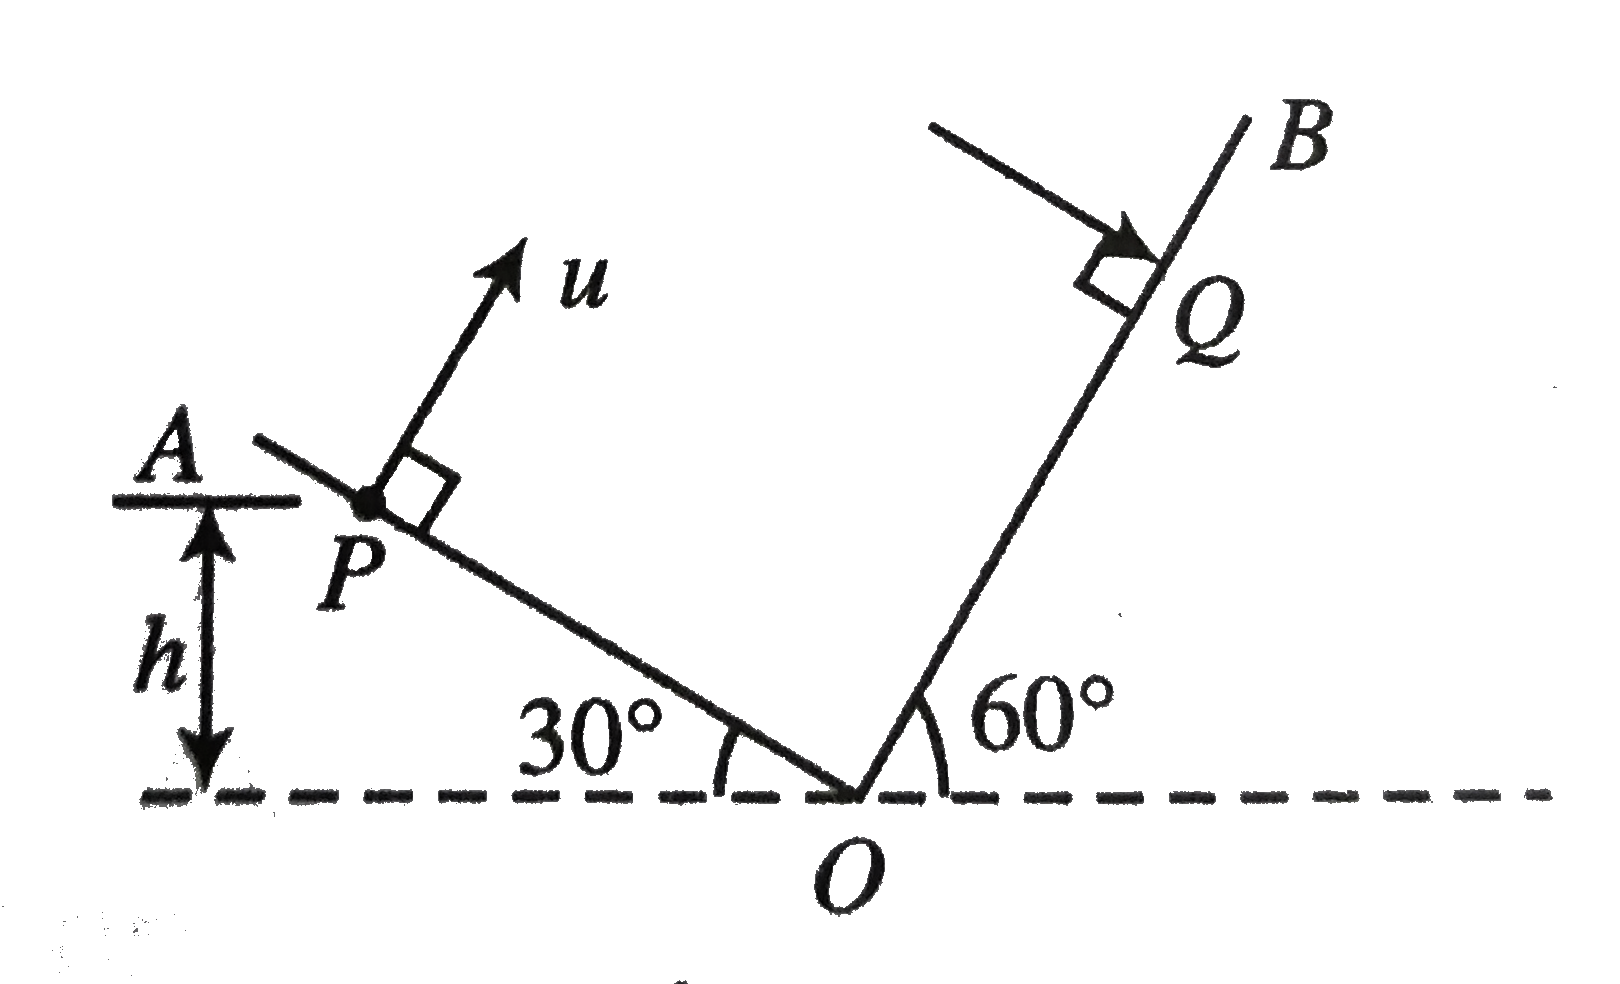 Two inclined planes OA and OB having inclination (with horizontal) 30^(@) and 60^(@), respectively, intersect each other at O as shown in figure. A particle is projected from point P with velocity u = 10(sqrt3) ms^(-1) along a direction perpendicular to plane OA. If the particle strikes plane OB perpendicularly at Q, calculate      Time of flight of the particles